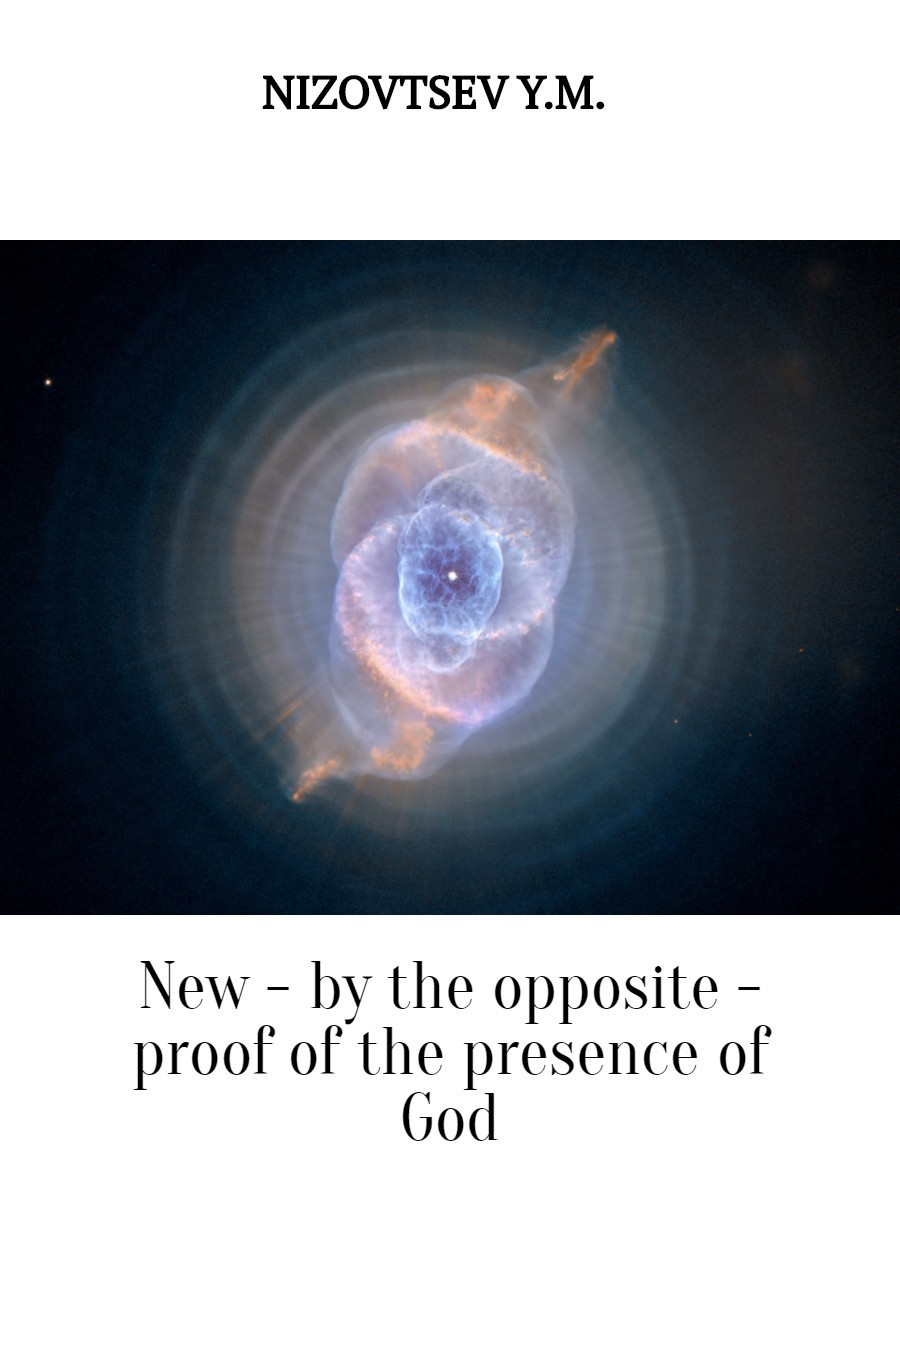 New– by the opposite – proof of the presence of God